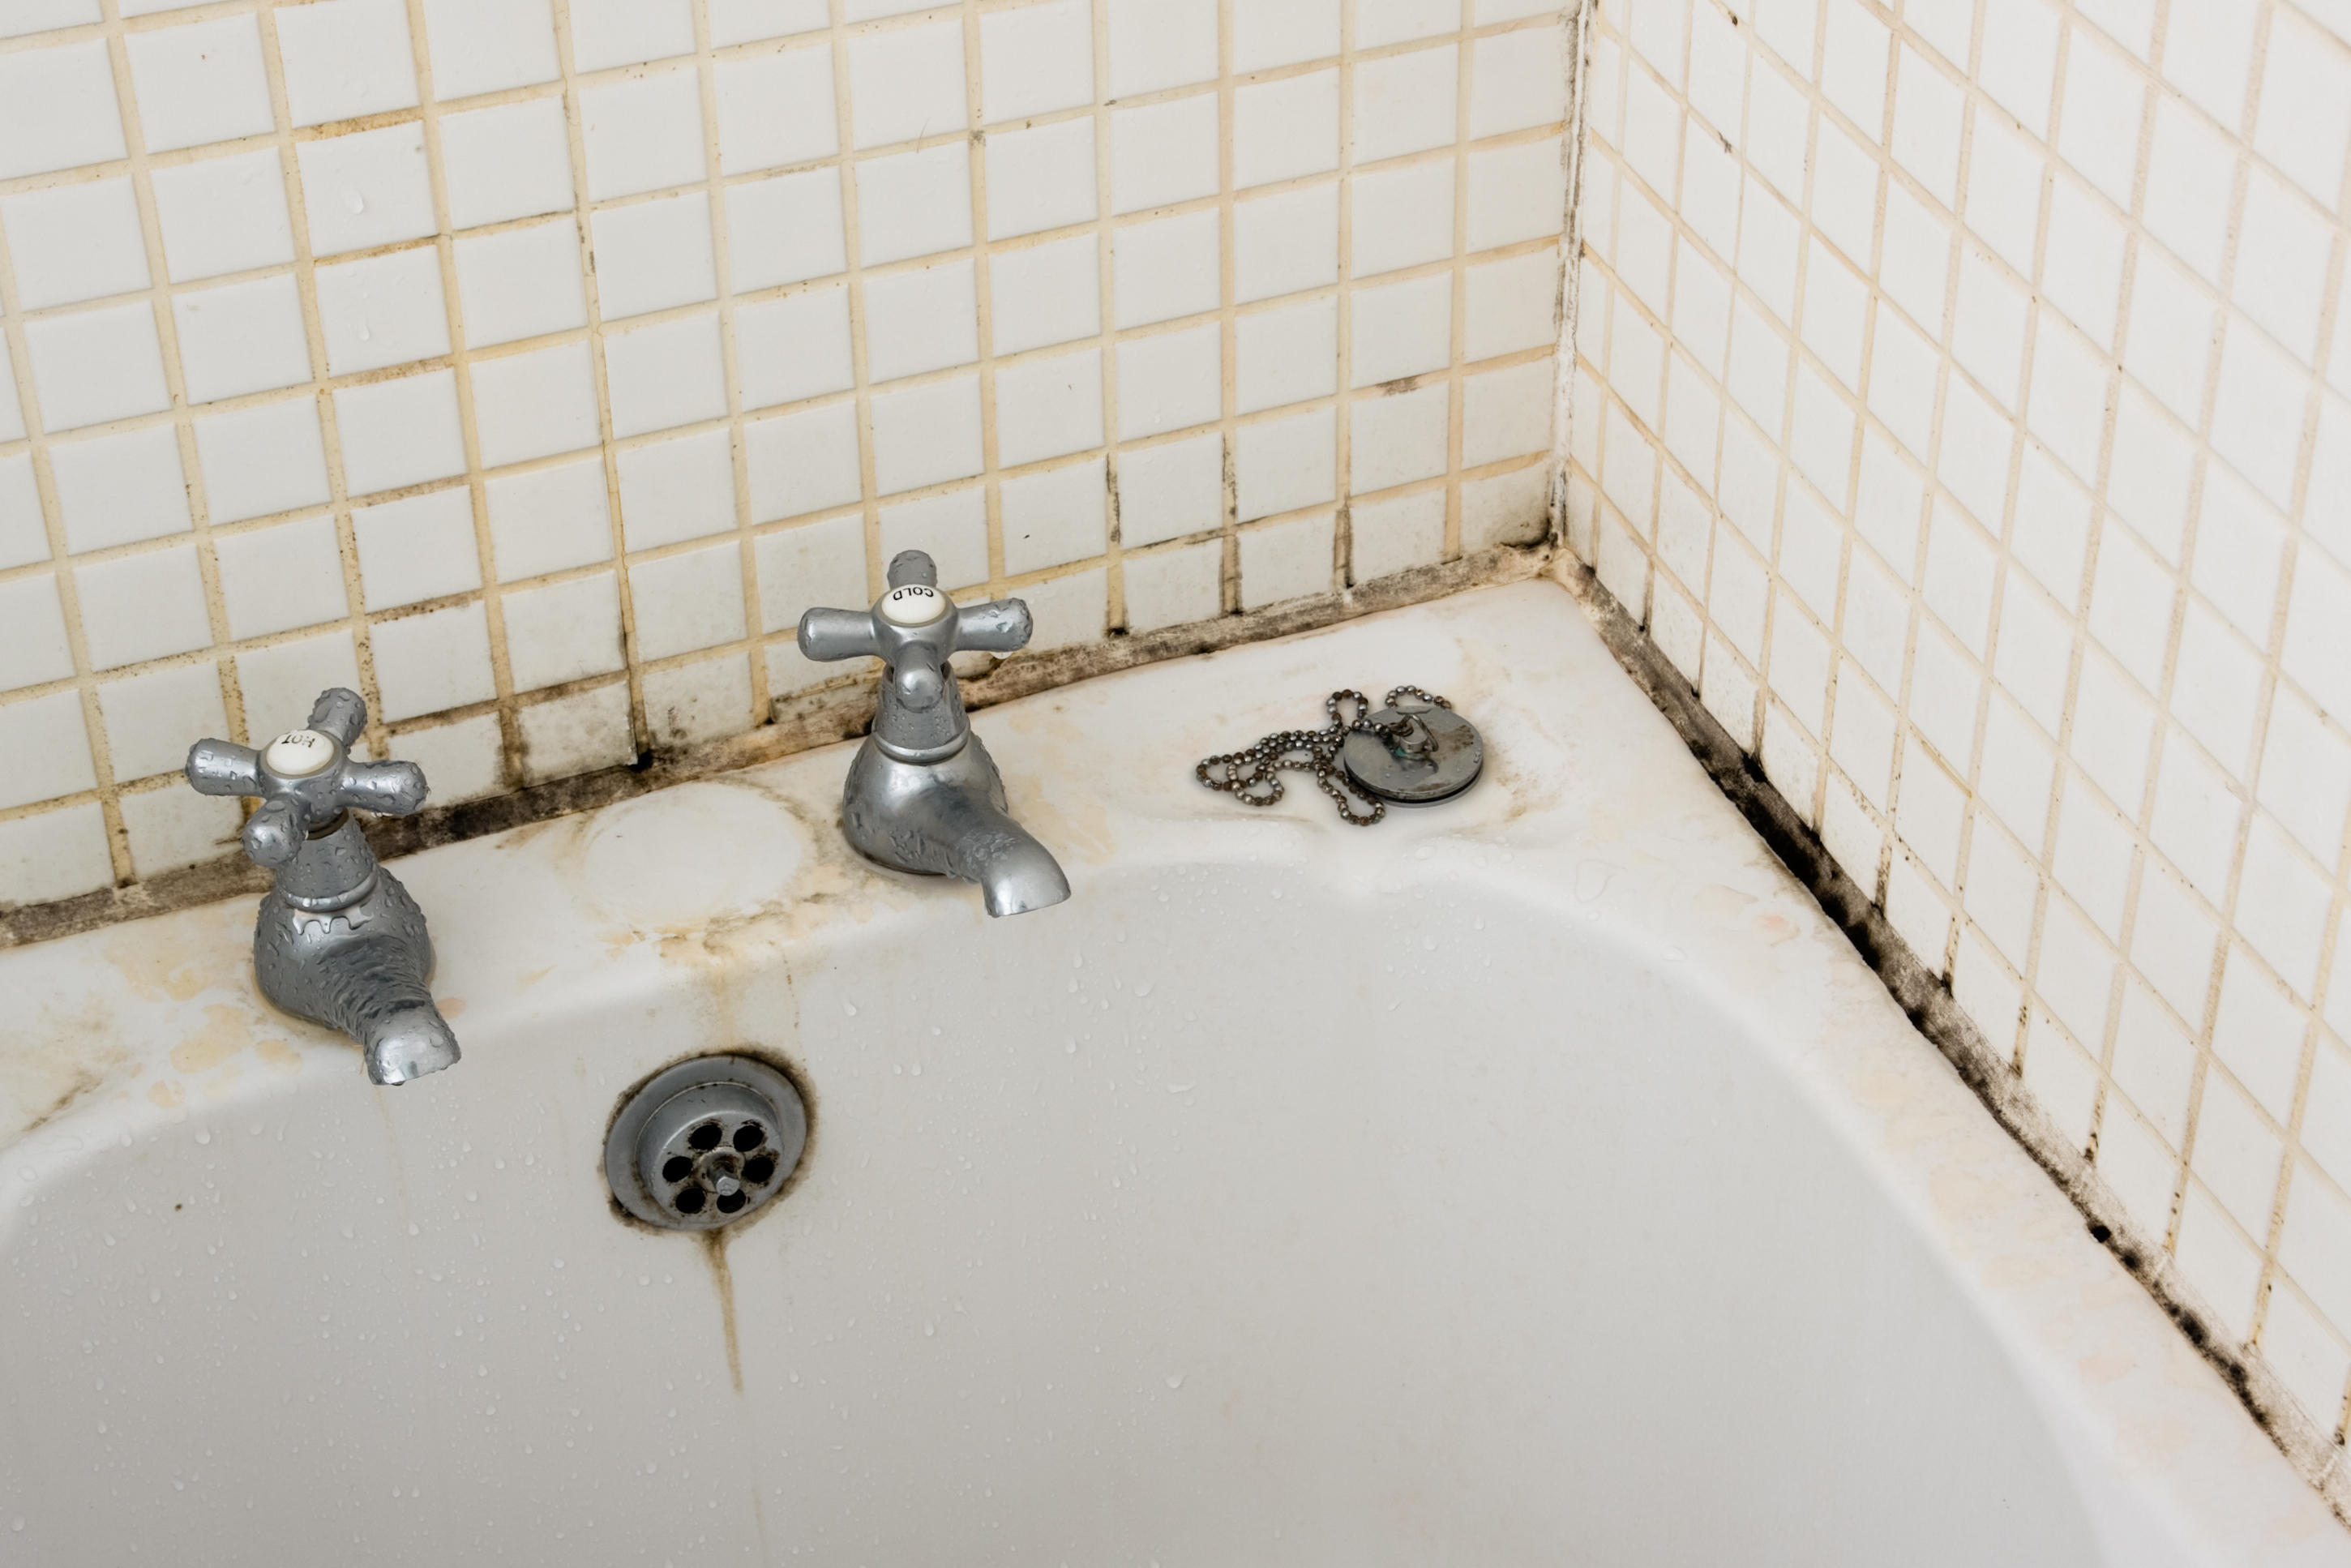 Black Mold In The Shower: How to Clean it